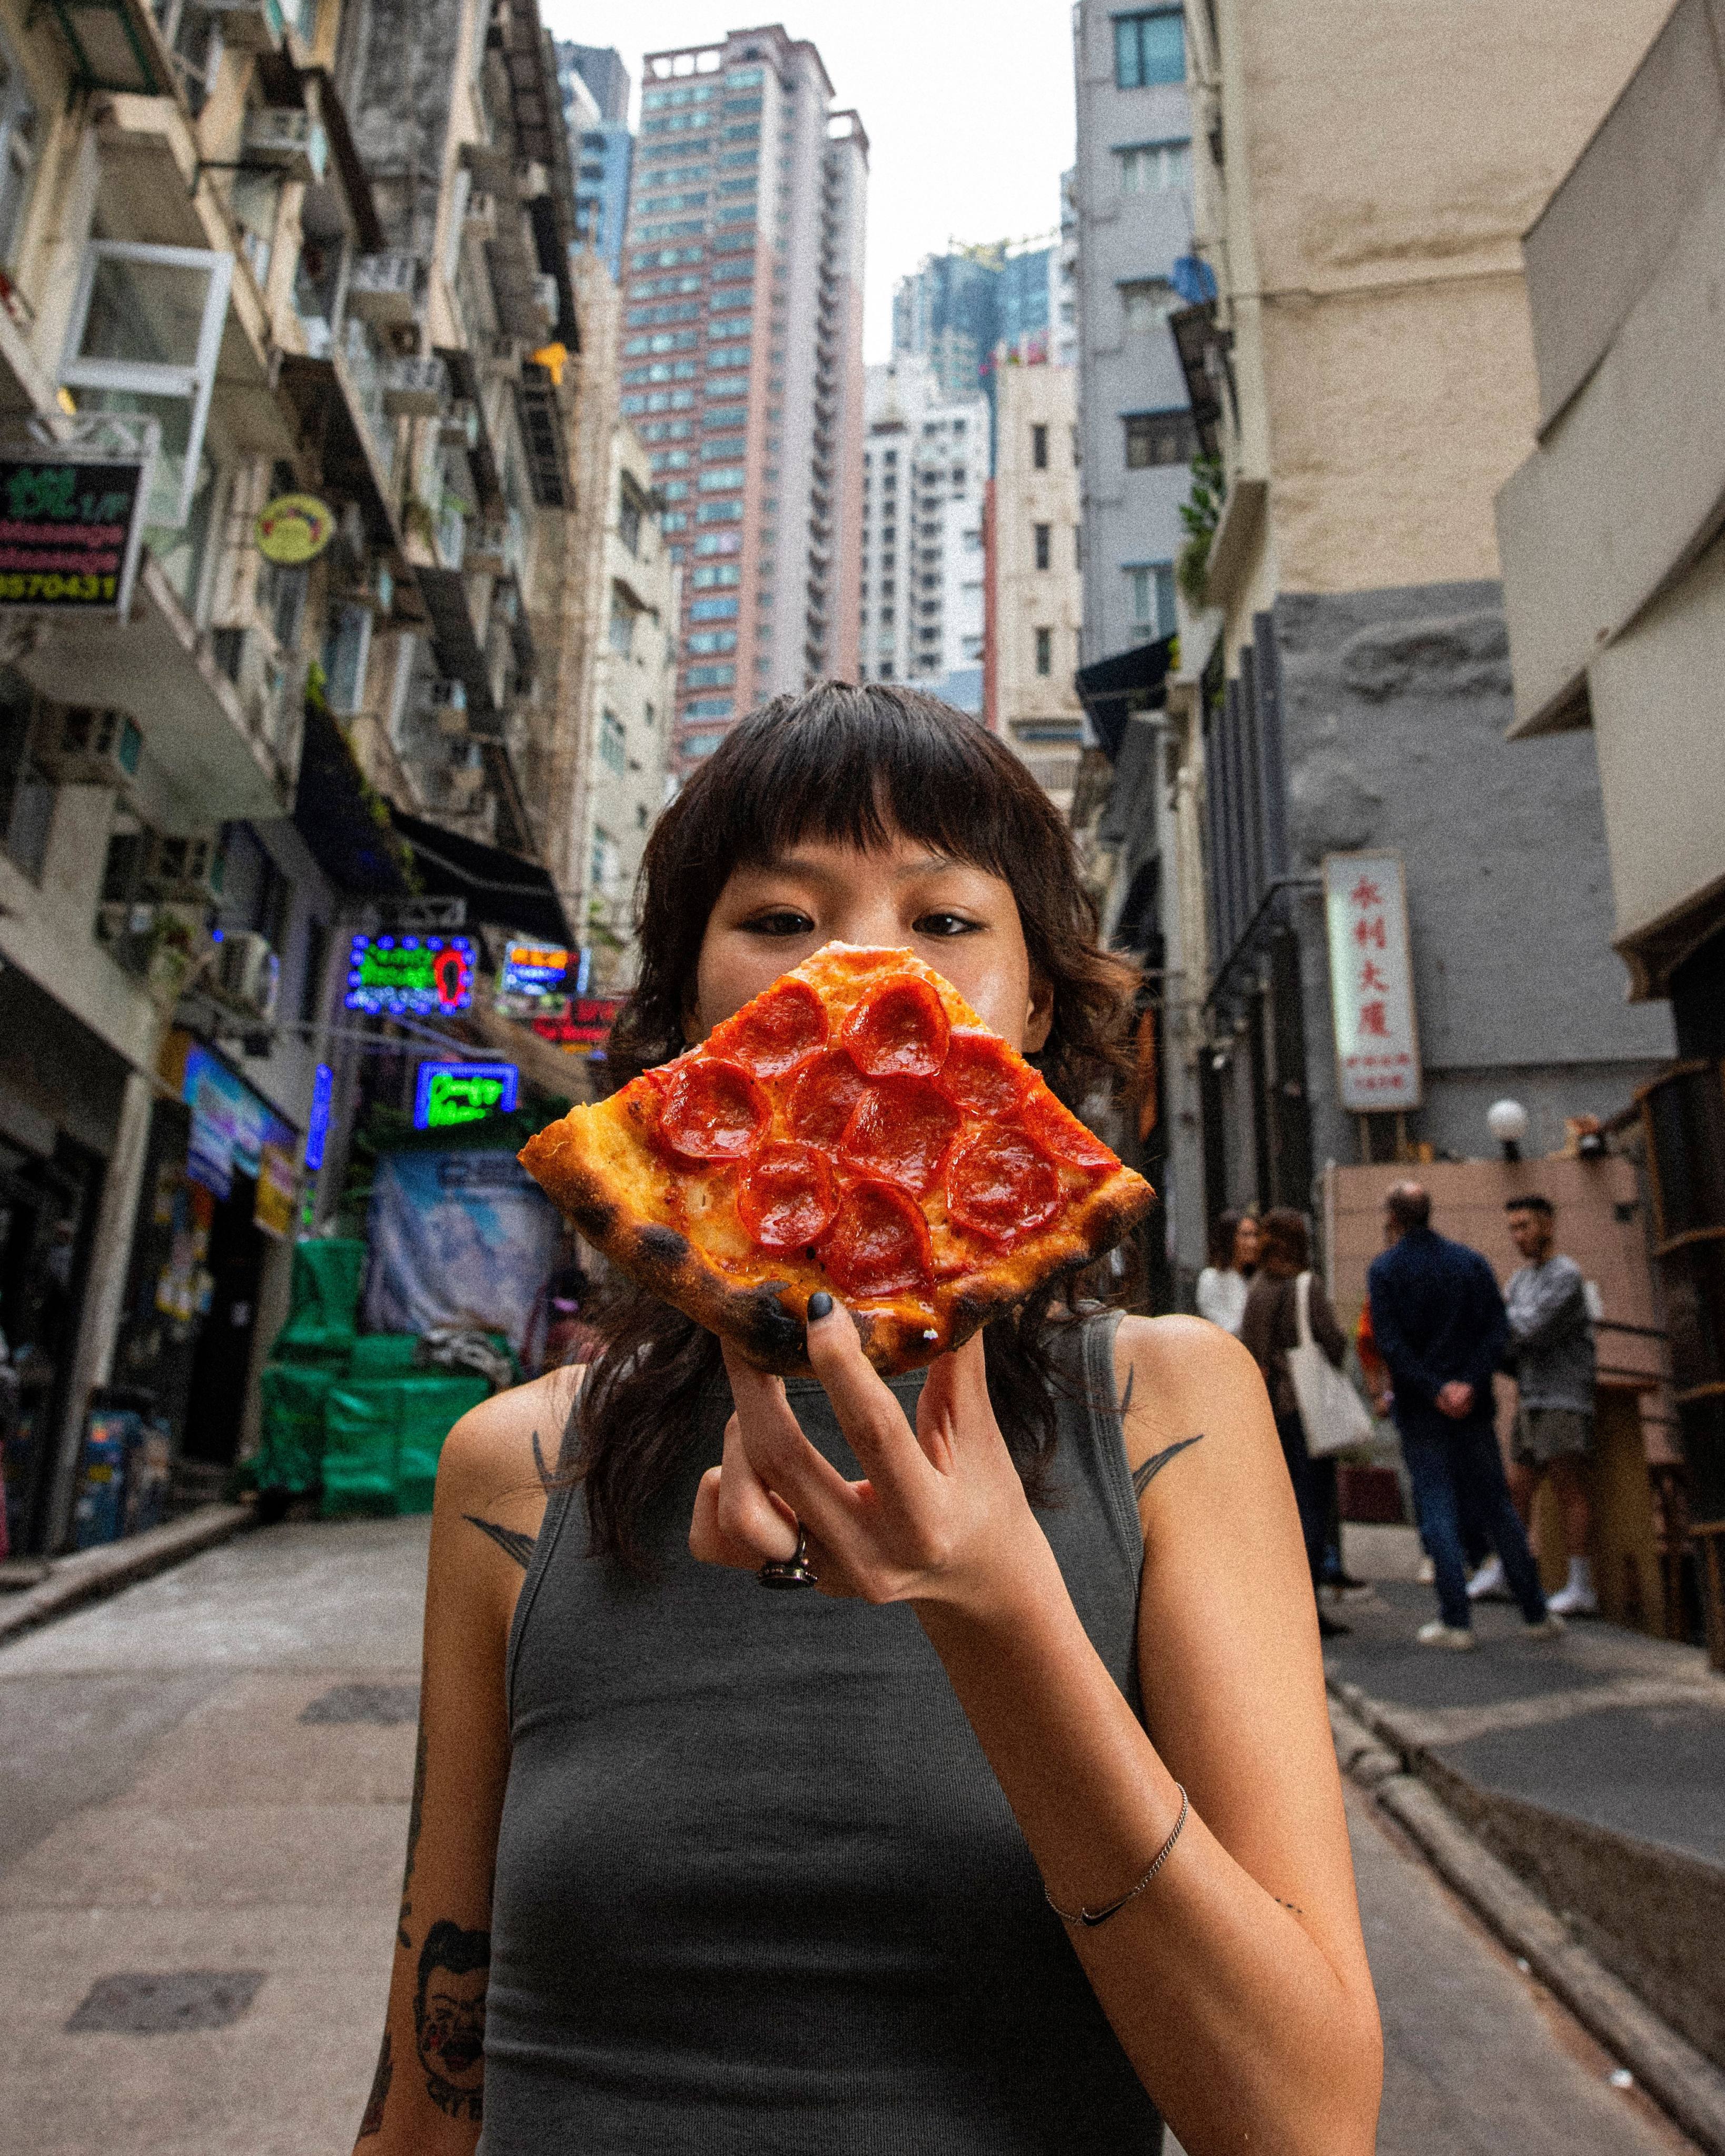 A slice of pie from Sonny’s Pizza, newly opened in SoHo, Hong Kong, which sells takeaway-only New York-style pizza made with a special dough. Photo: Sonny’s Pizza